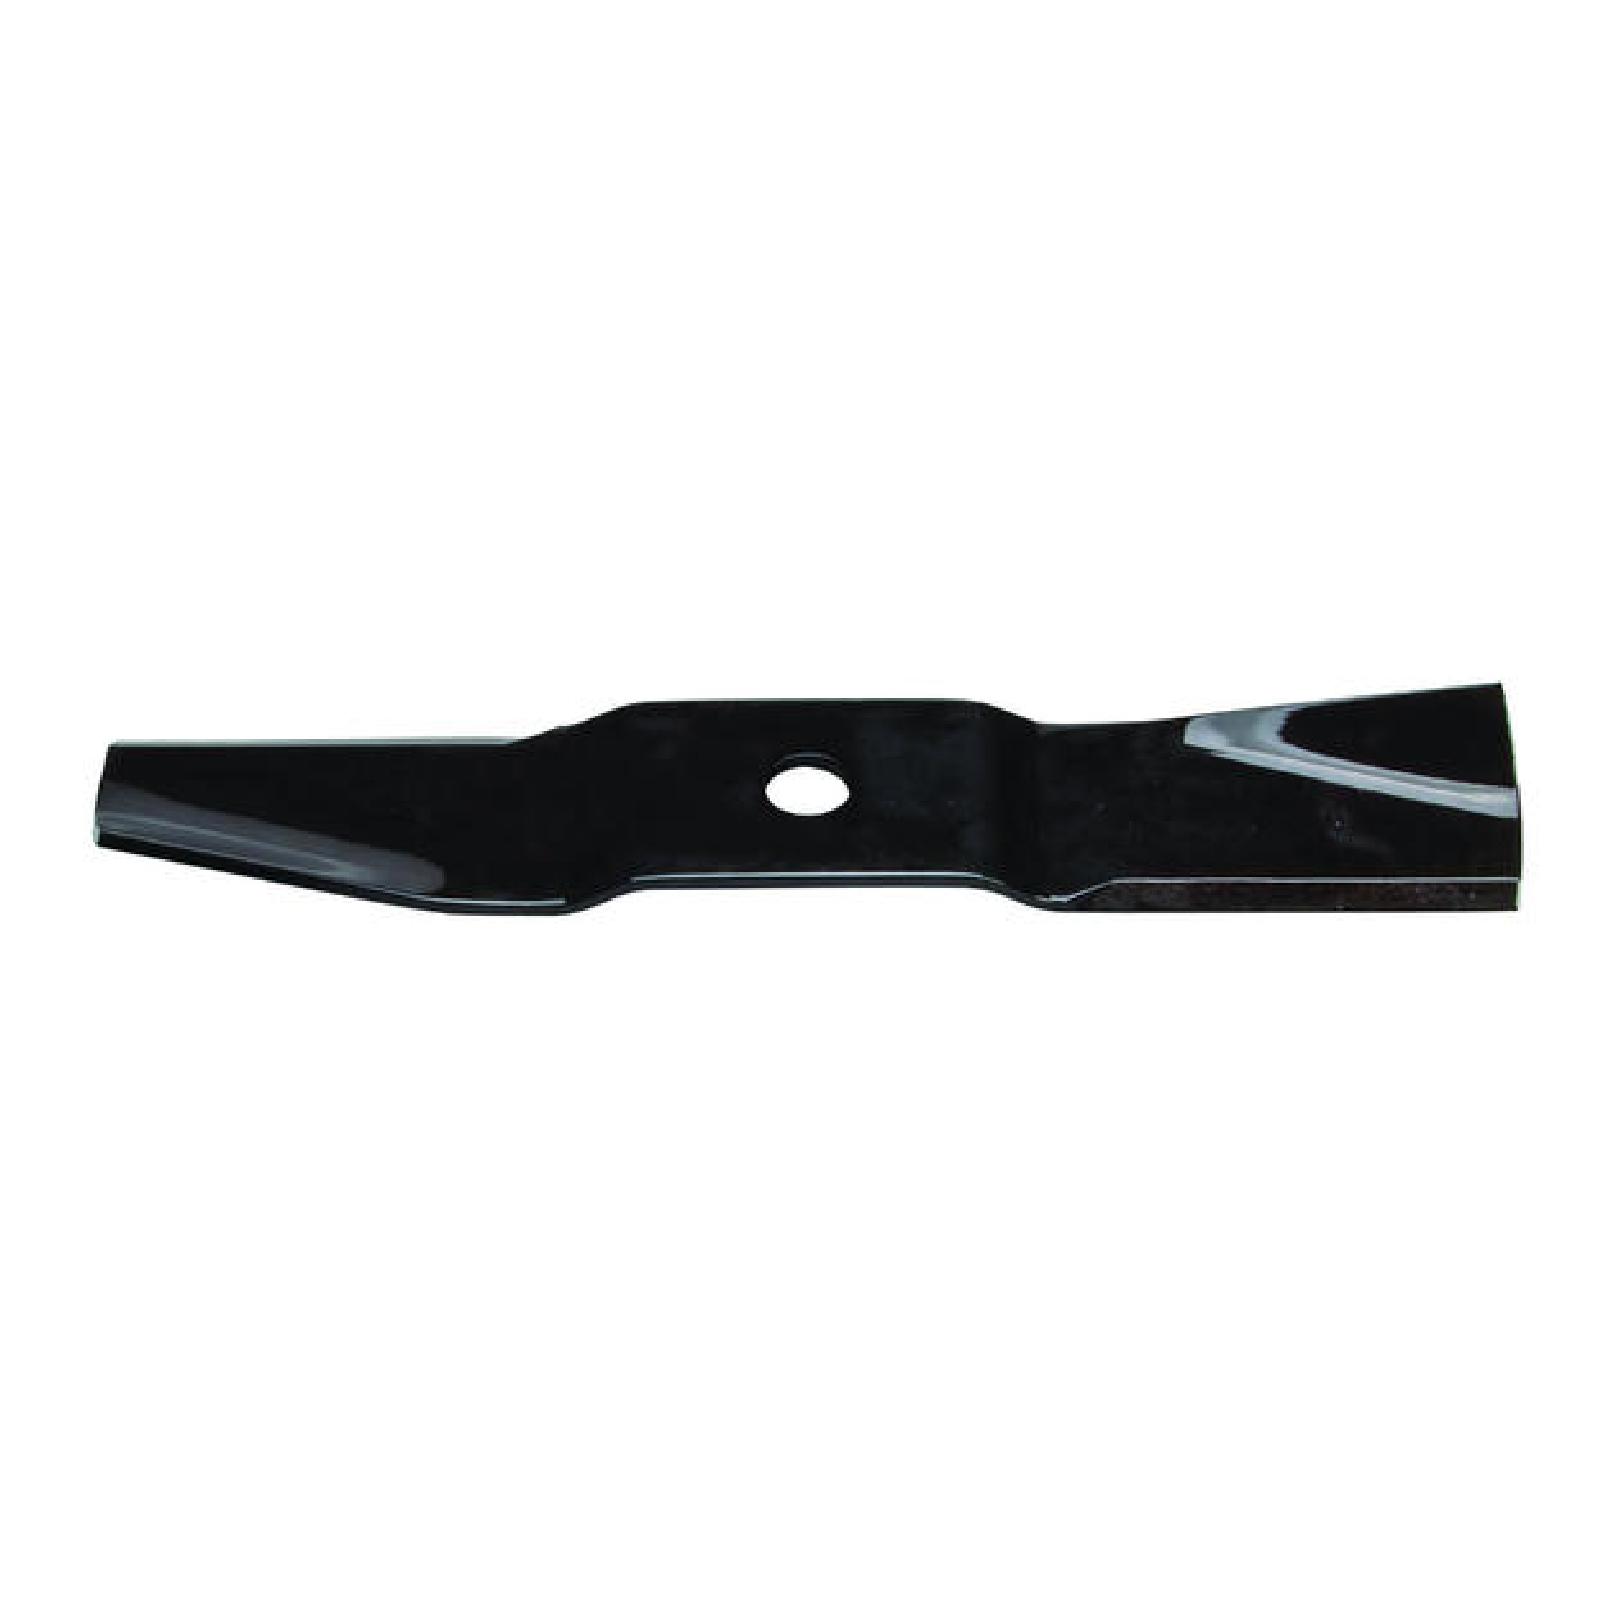 BLADE, EXMARK, FUSION, 16 part# 492726 by Oregon - Click Image to Close